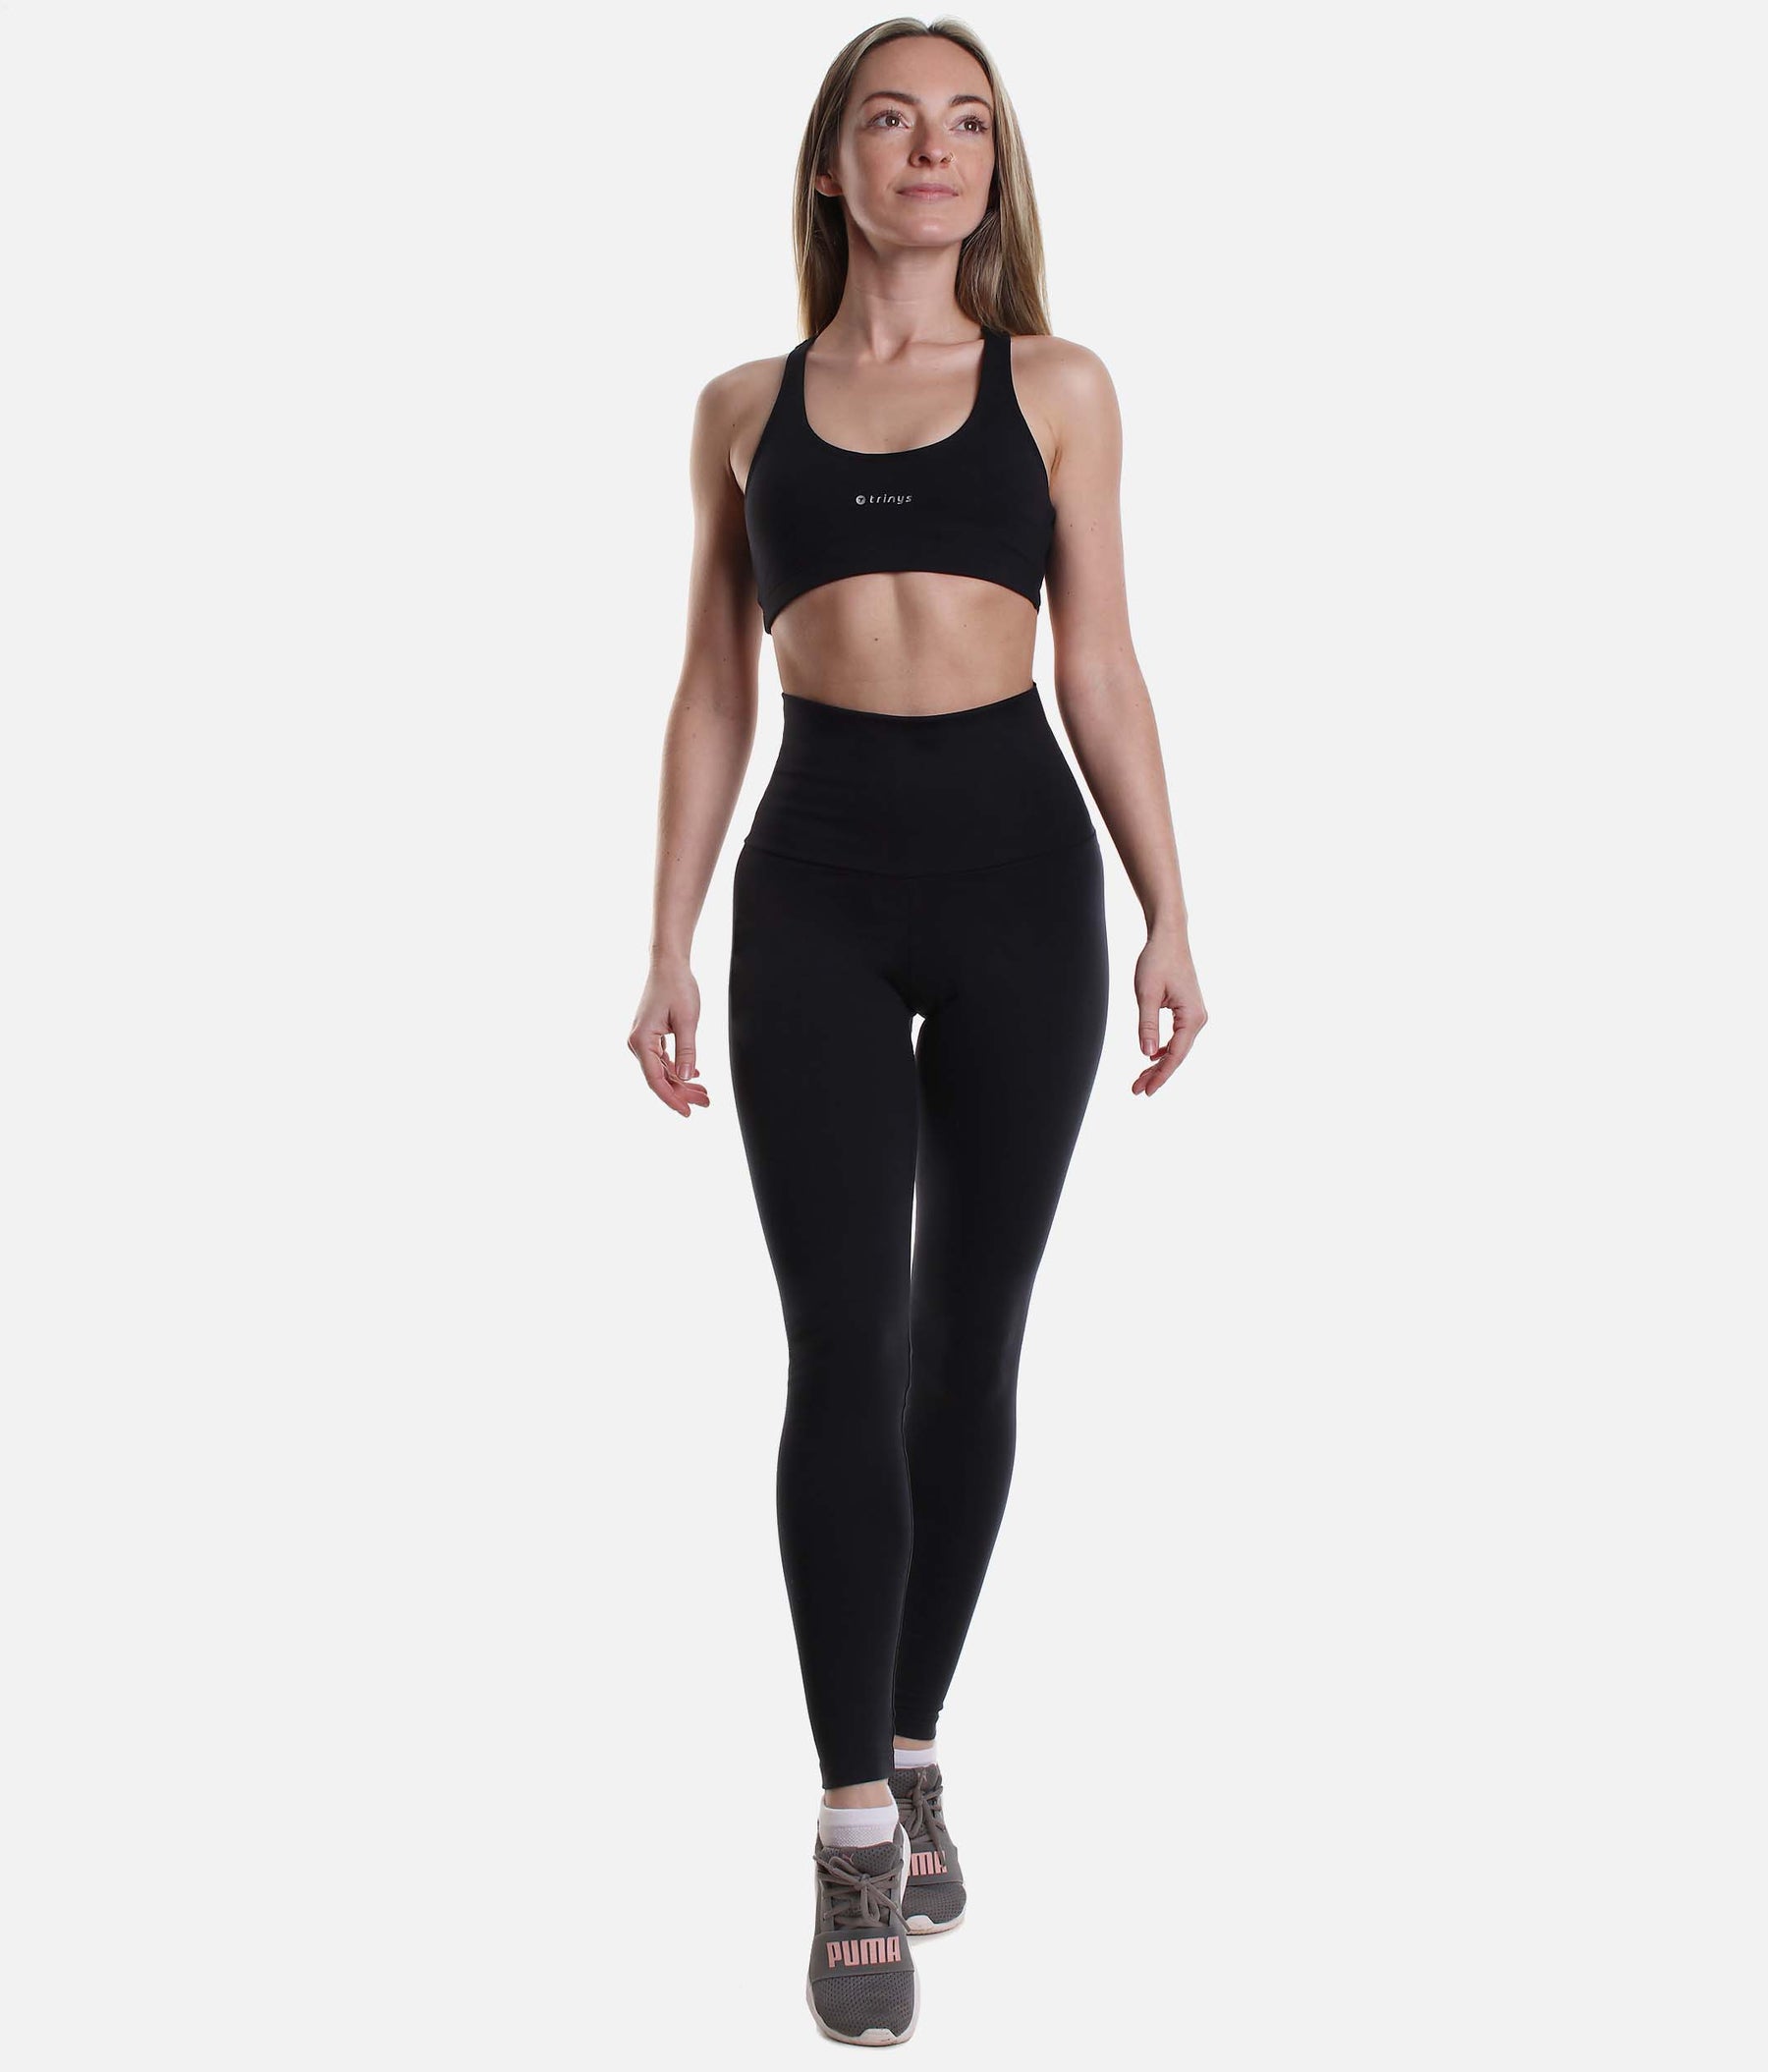 High Waisted Compression Leggings - F 13478